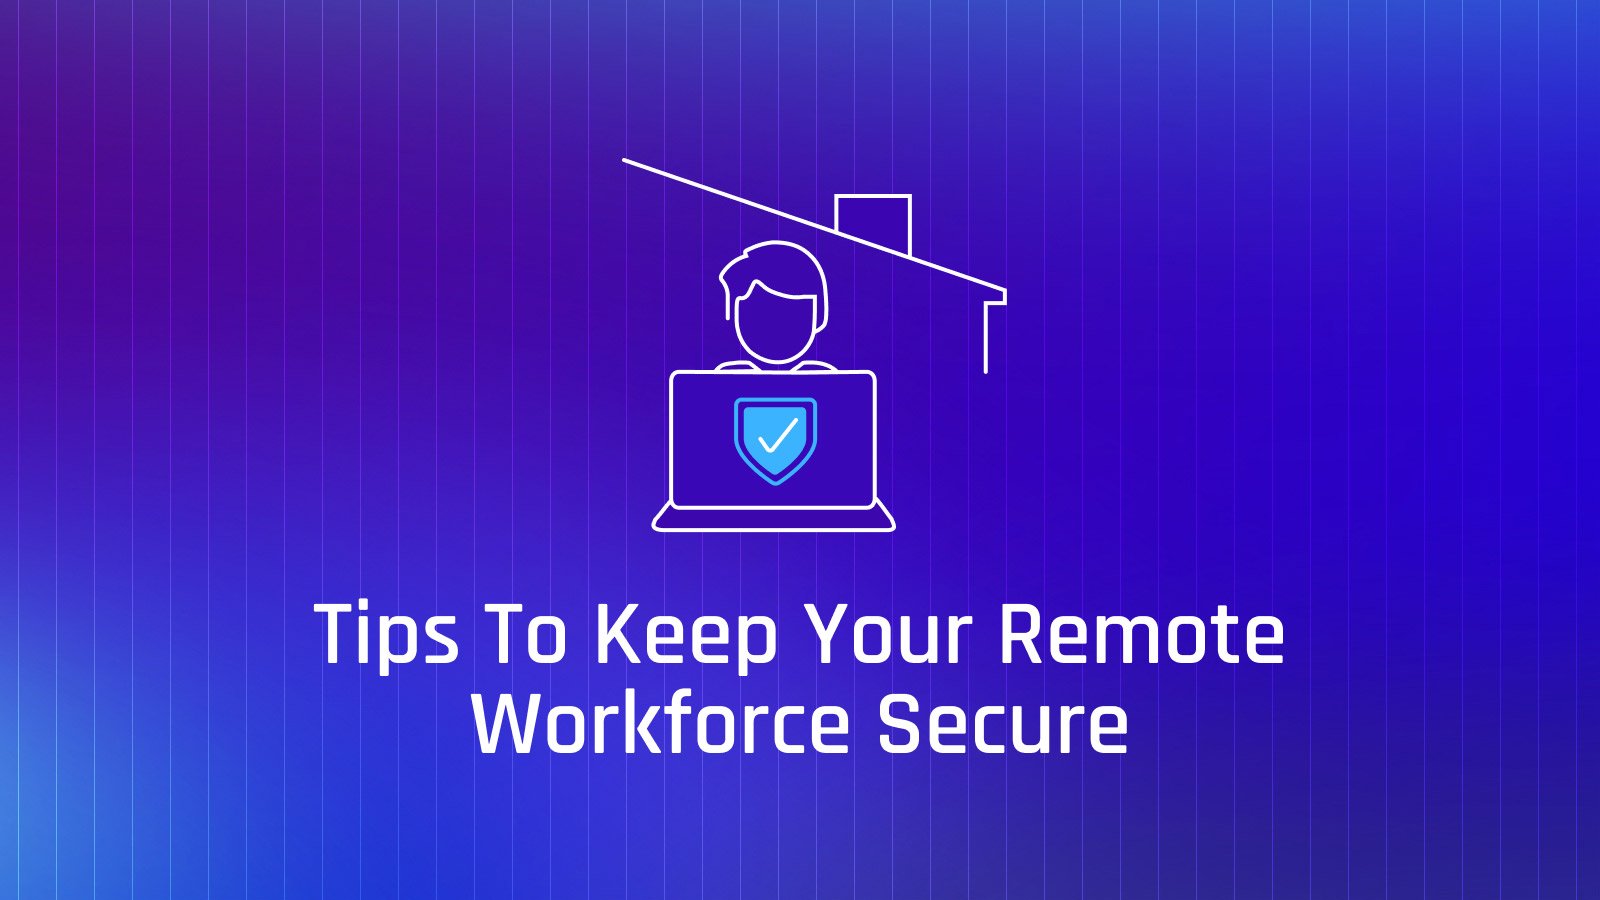 Tips to Secure Your Remote Workforce